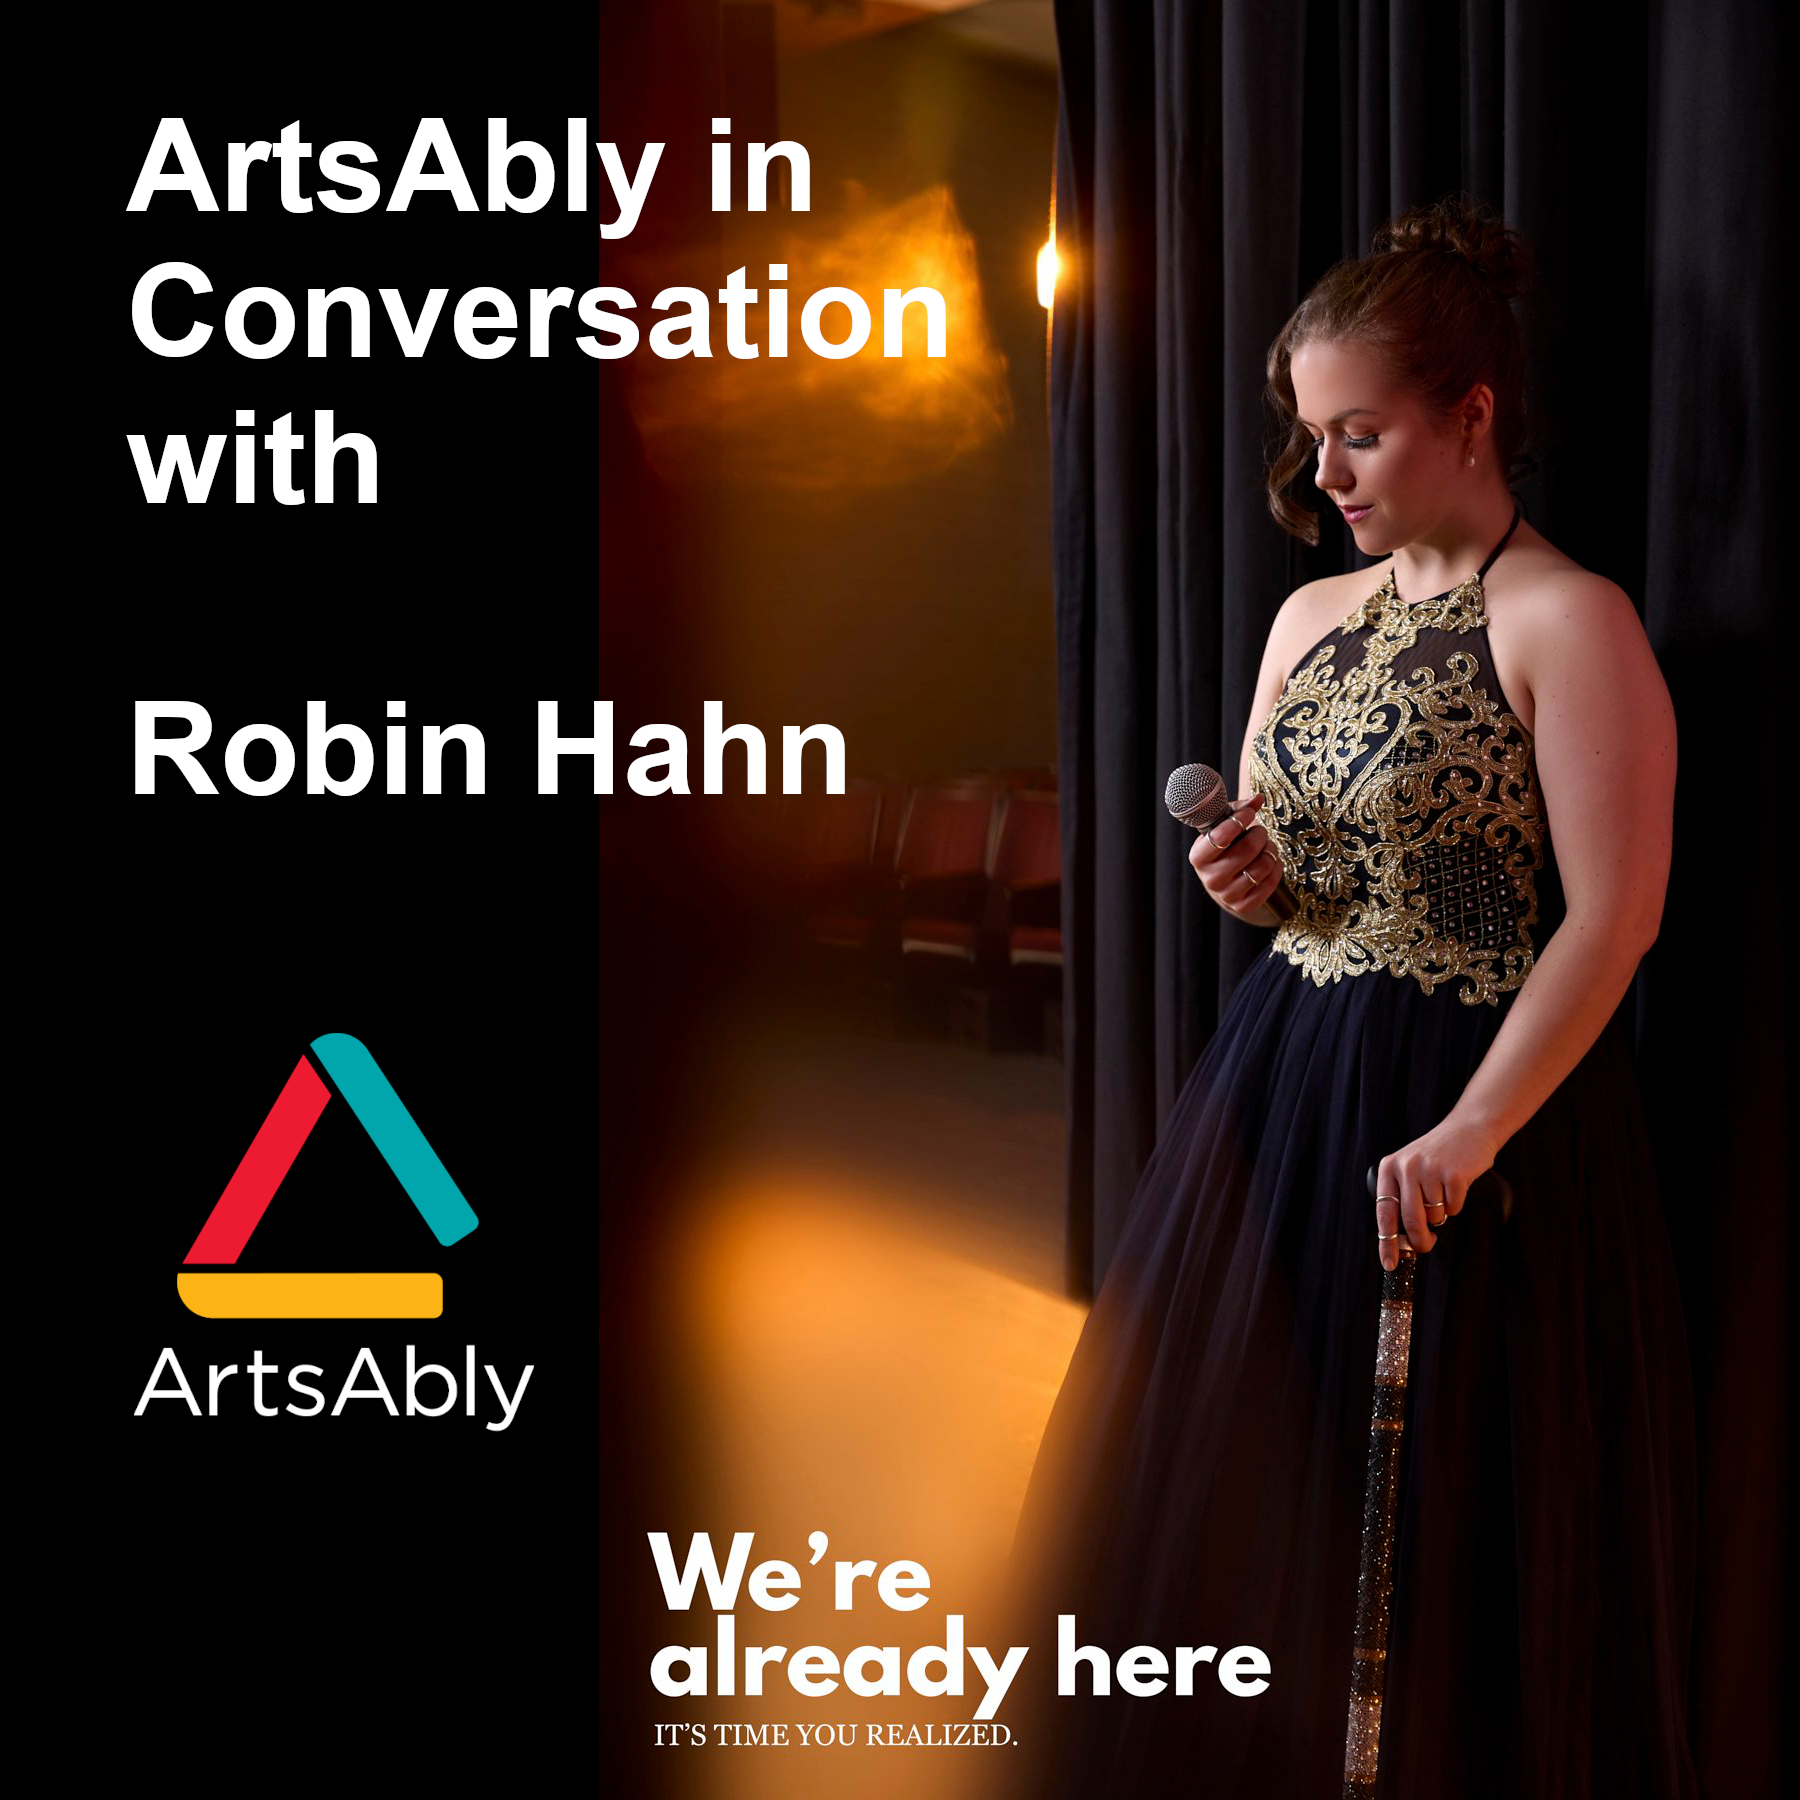 Episode 8: ArtsAbly in Conversation with Robin Hahn